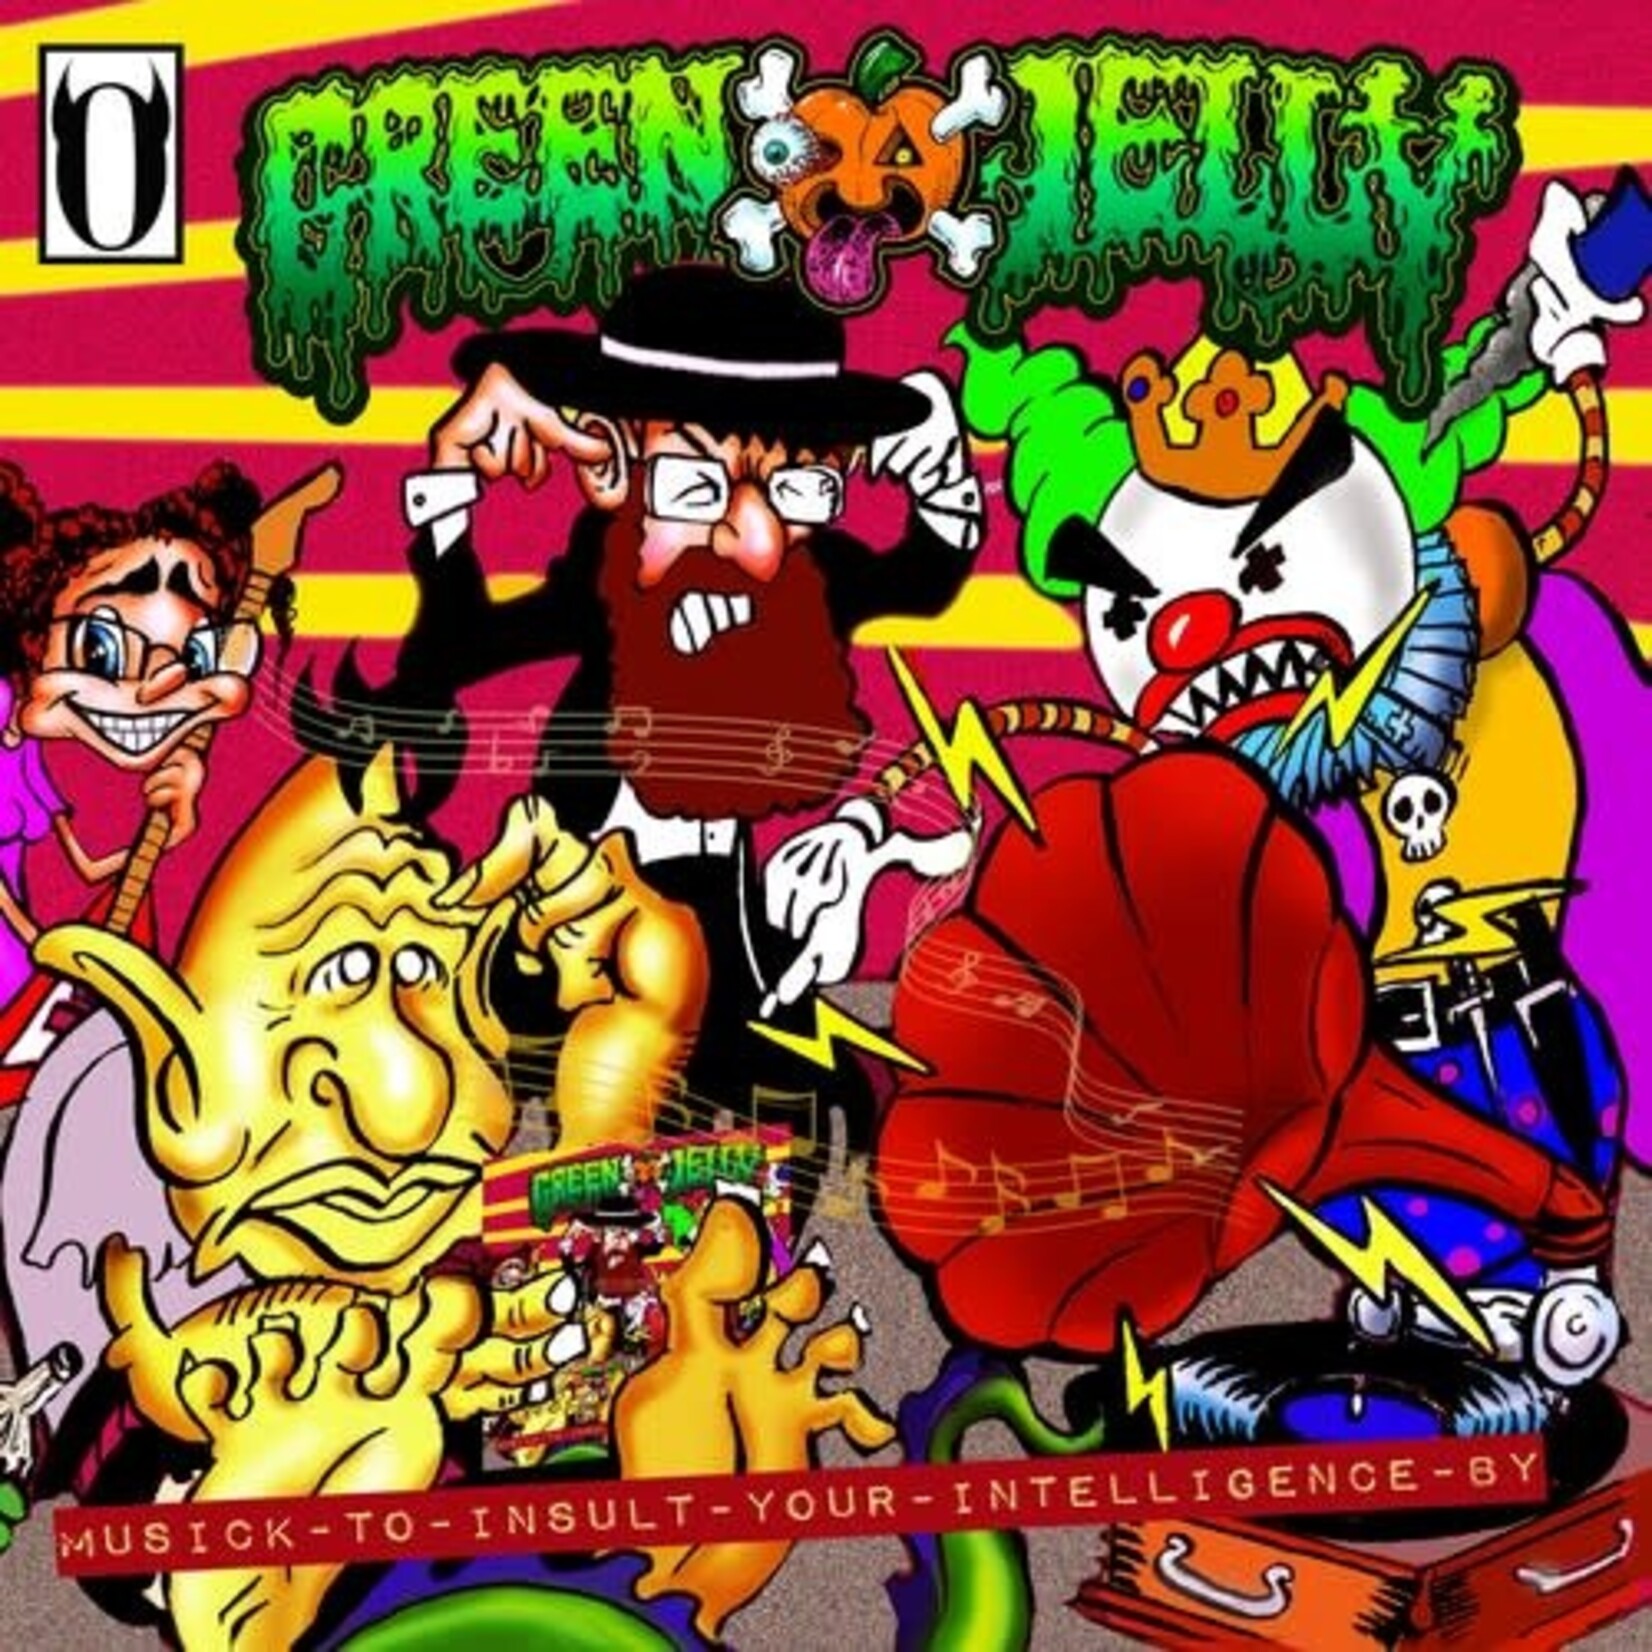 Green Jelly - Musick-To-Insult-Your-Intelligence-By (Orange/Black Vinyl) [LP] (RSDBF2022)